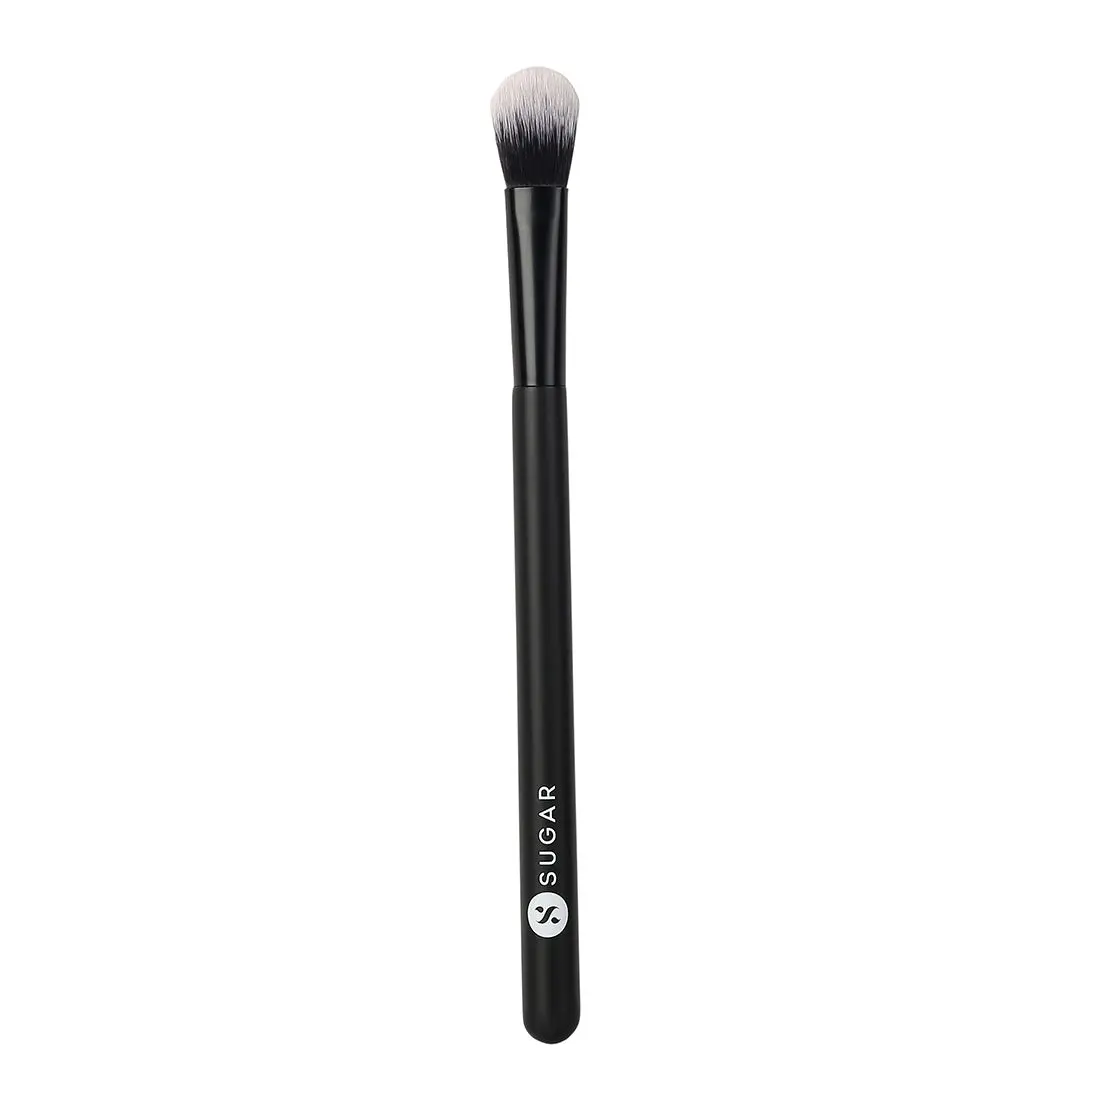 SUGAR Cosmetics - Blend Trend - 006 Highlighter Brush (Brush For Easy Application of Highlighter) - Soft, Synthetic Bristles and Wooden Handle